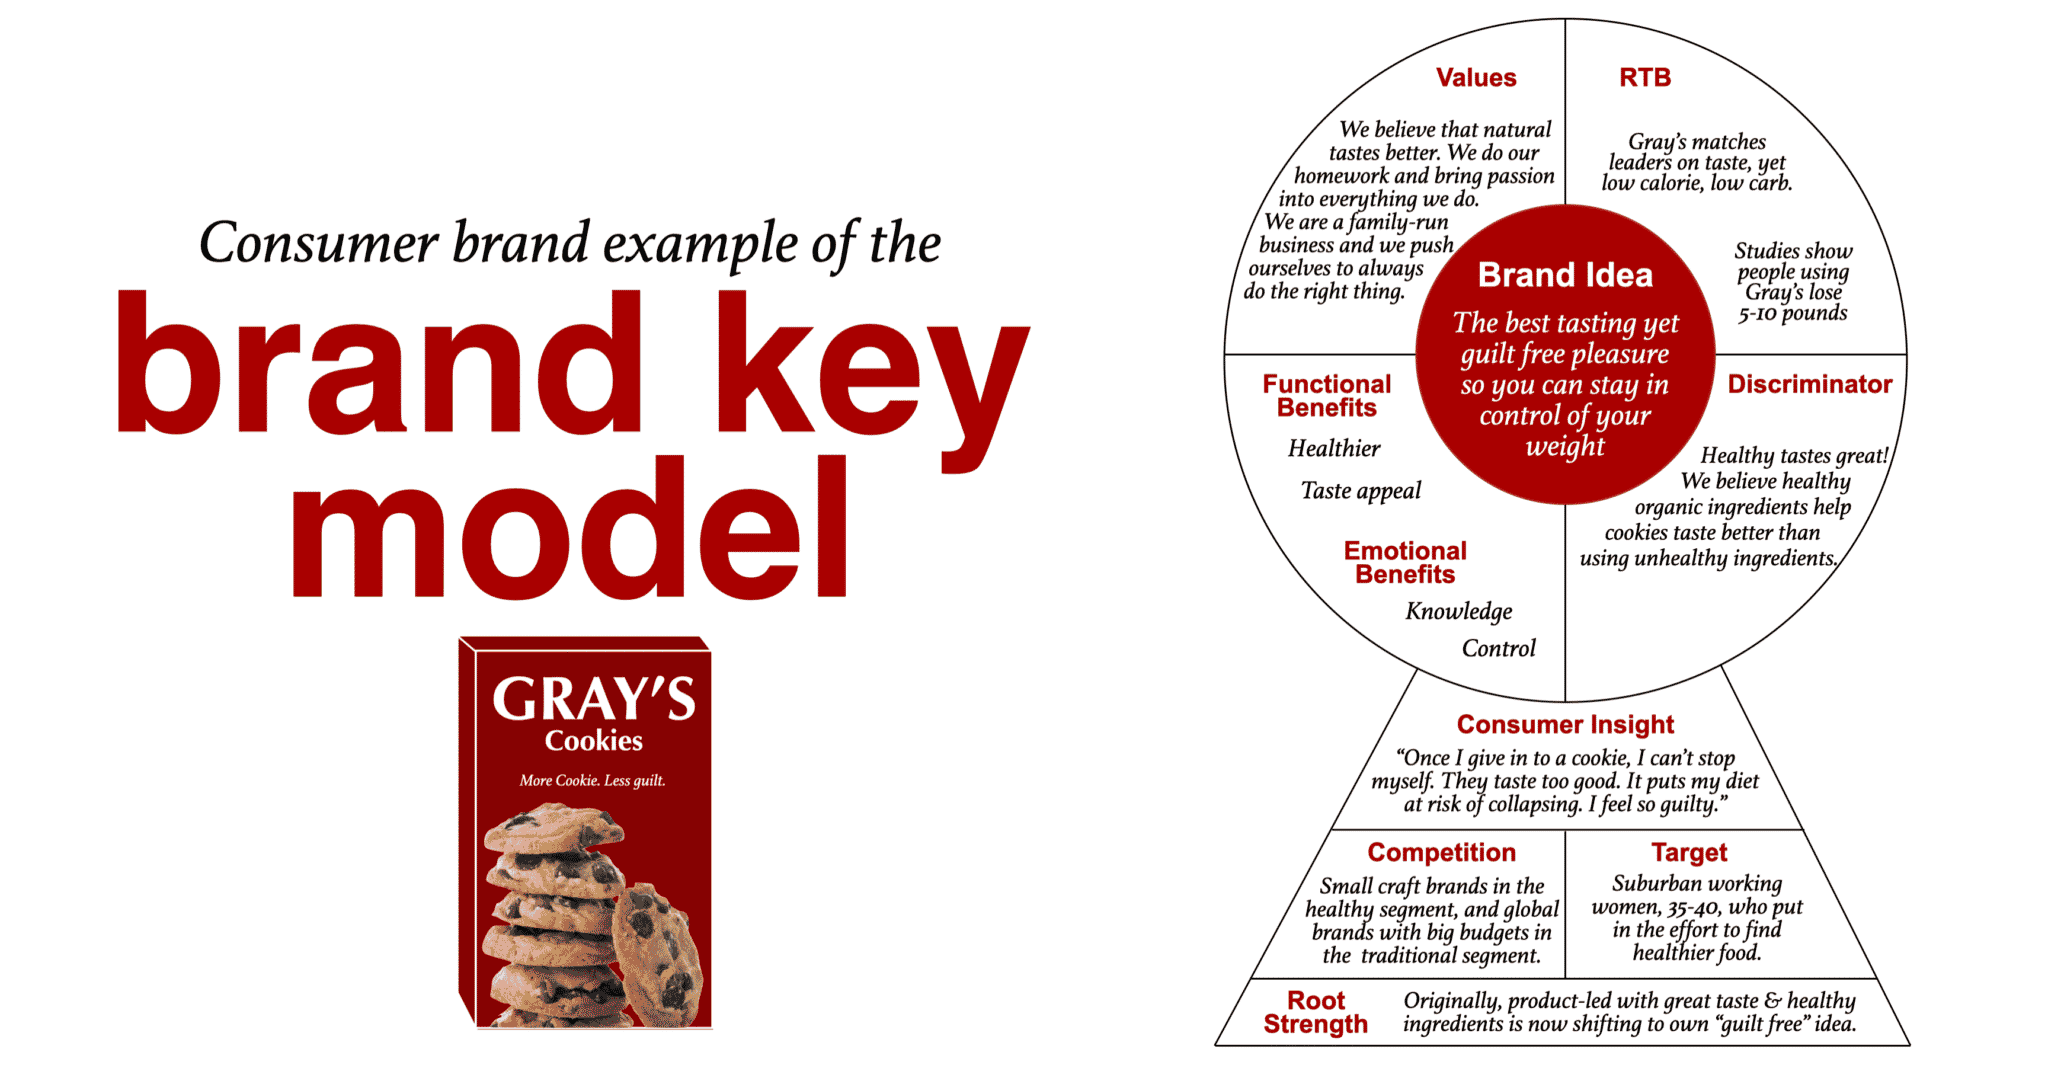 How to use a Brand Key Model to display your brand #39 s USP